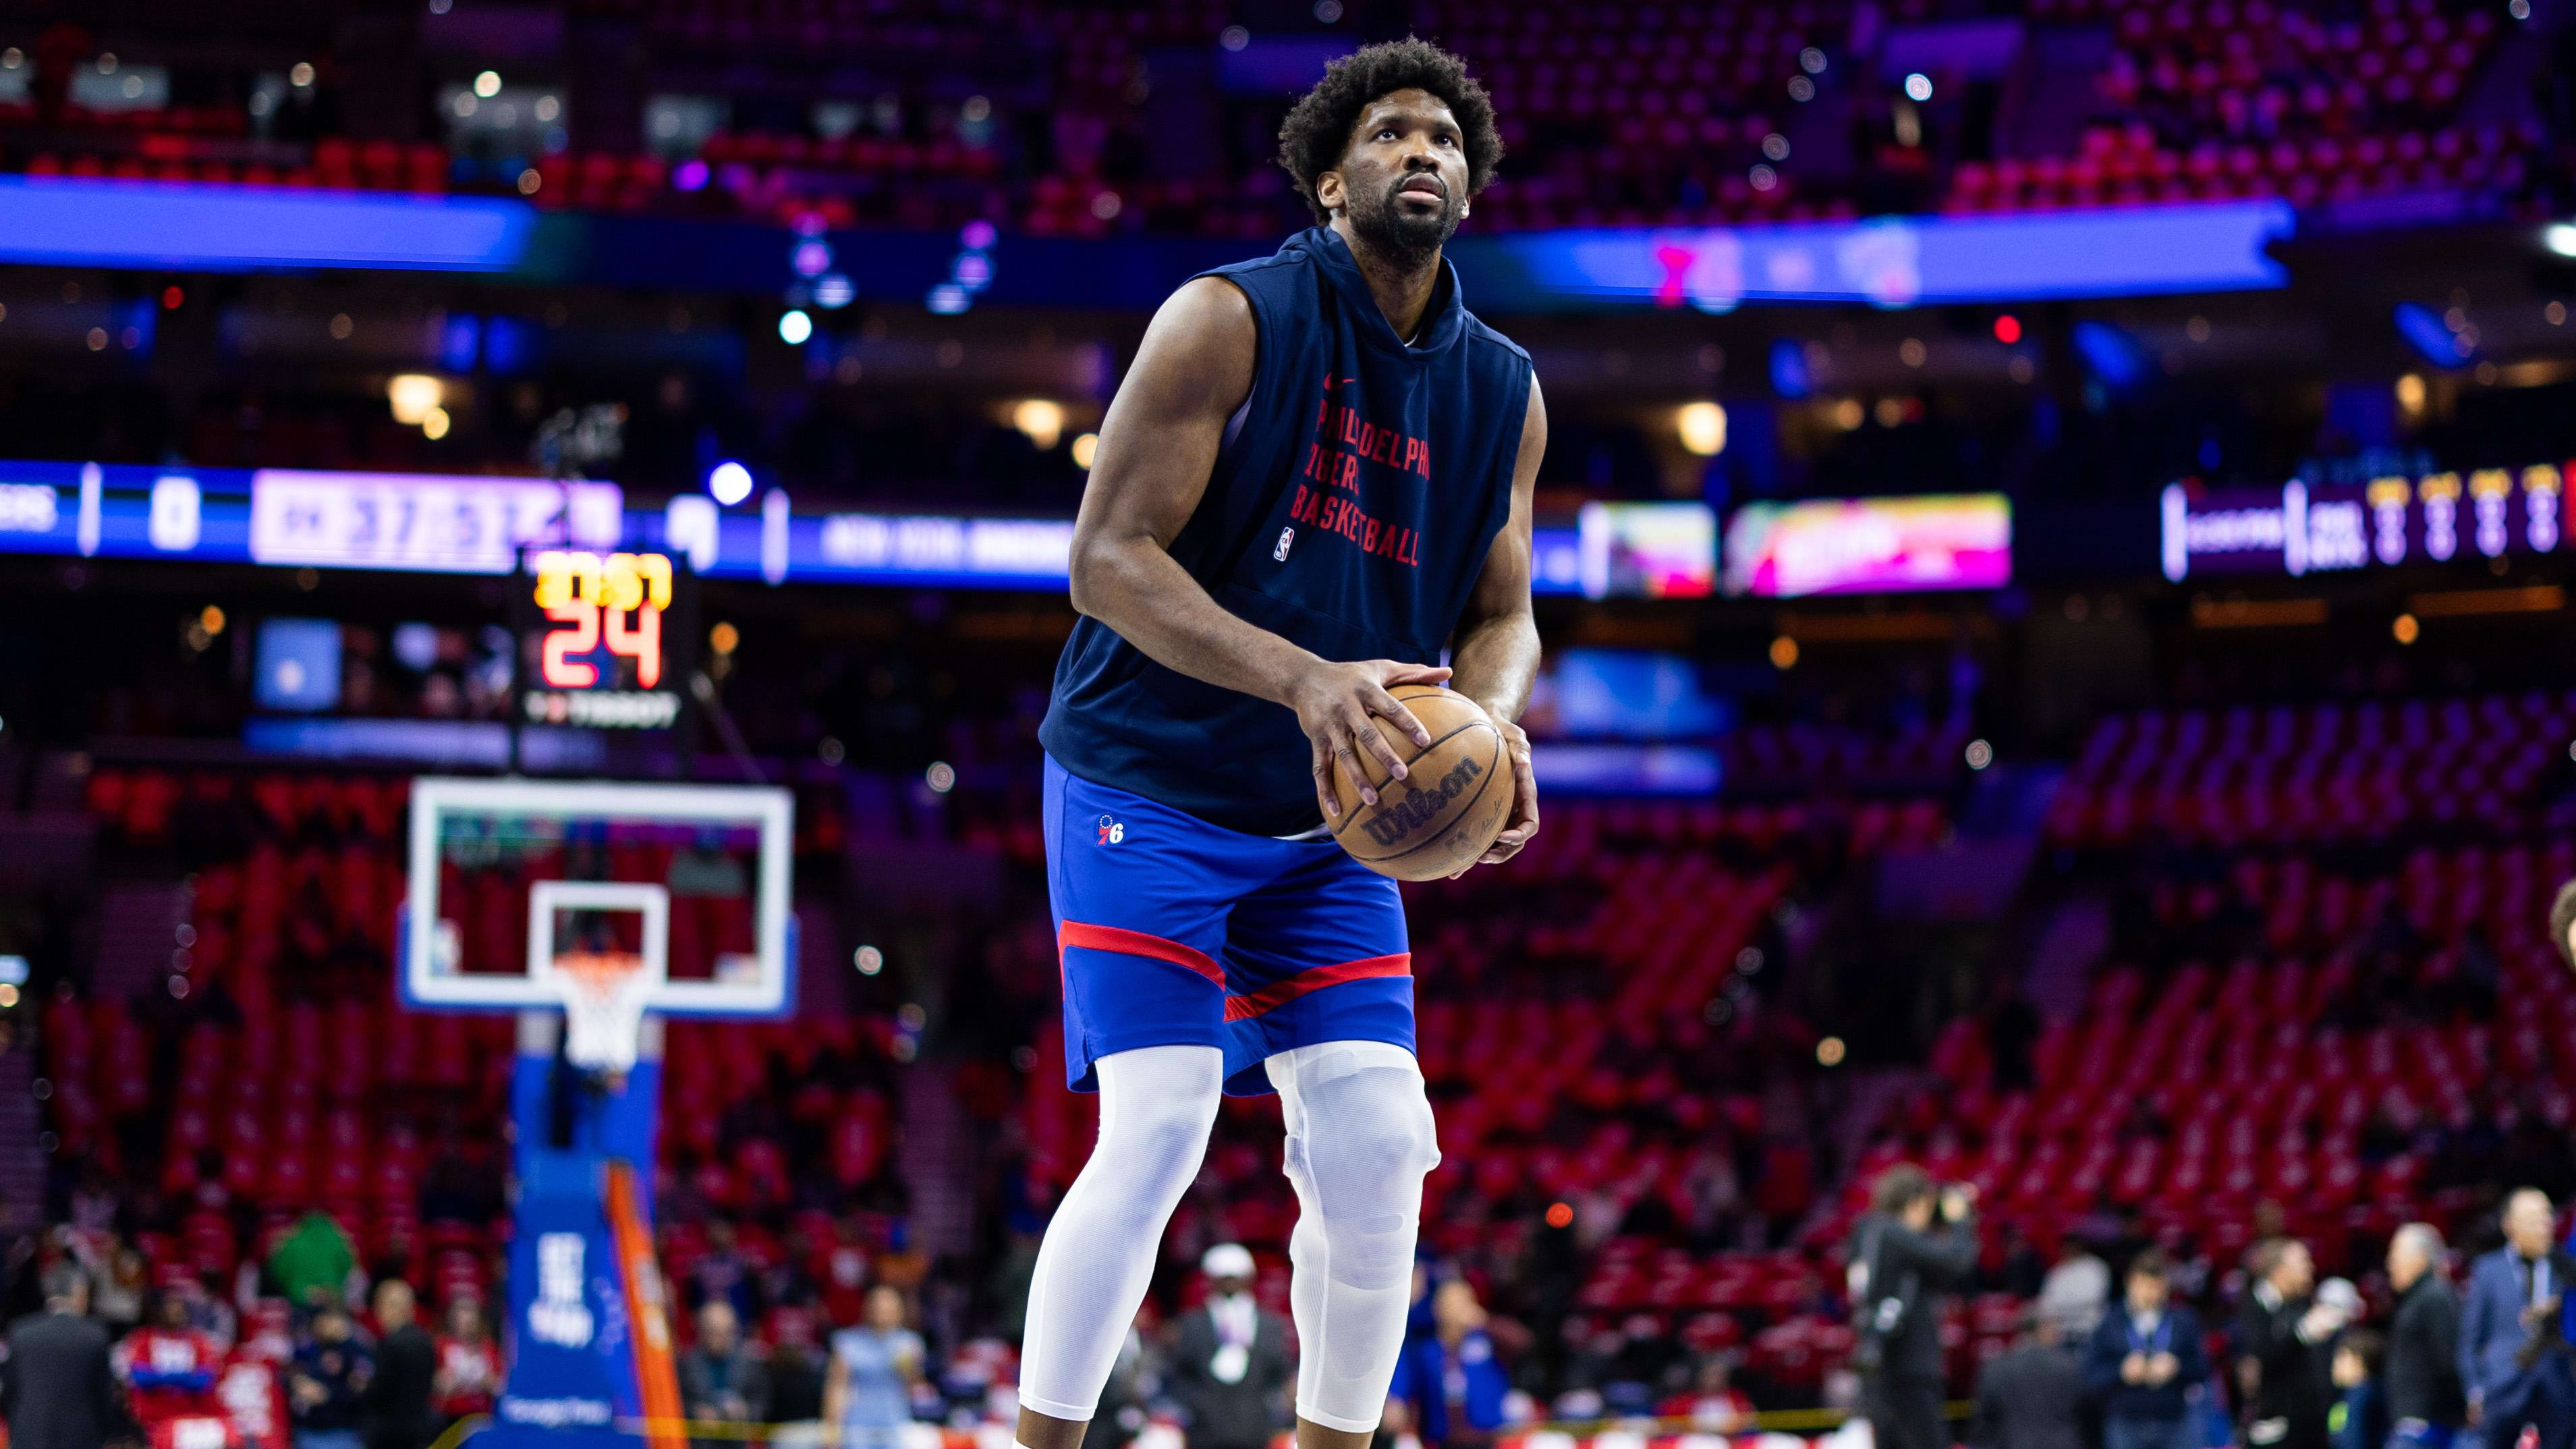 Defying Odds: Joel Embiid’s Postseason Performance Despite Knee Injury and Bell’s Palsy Diagnosis.